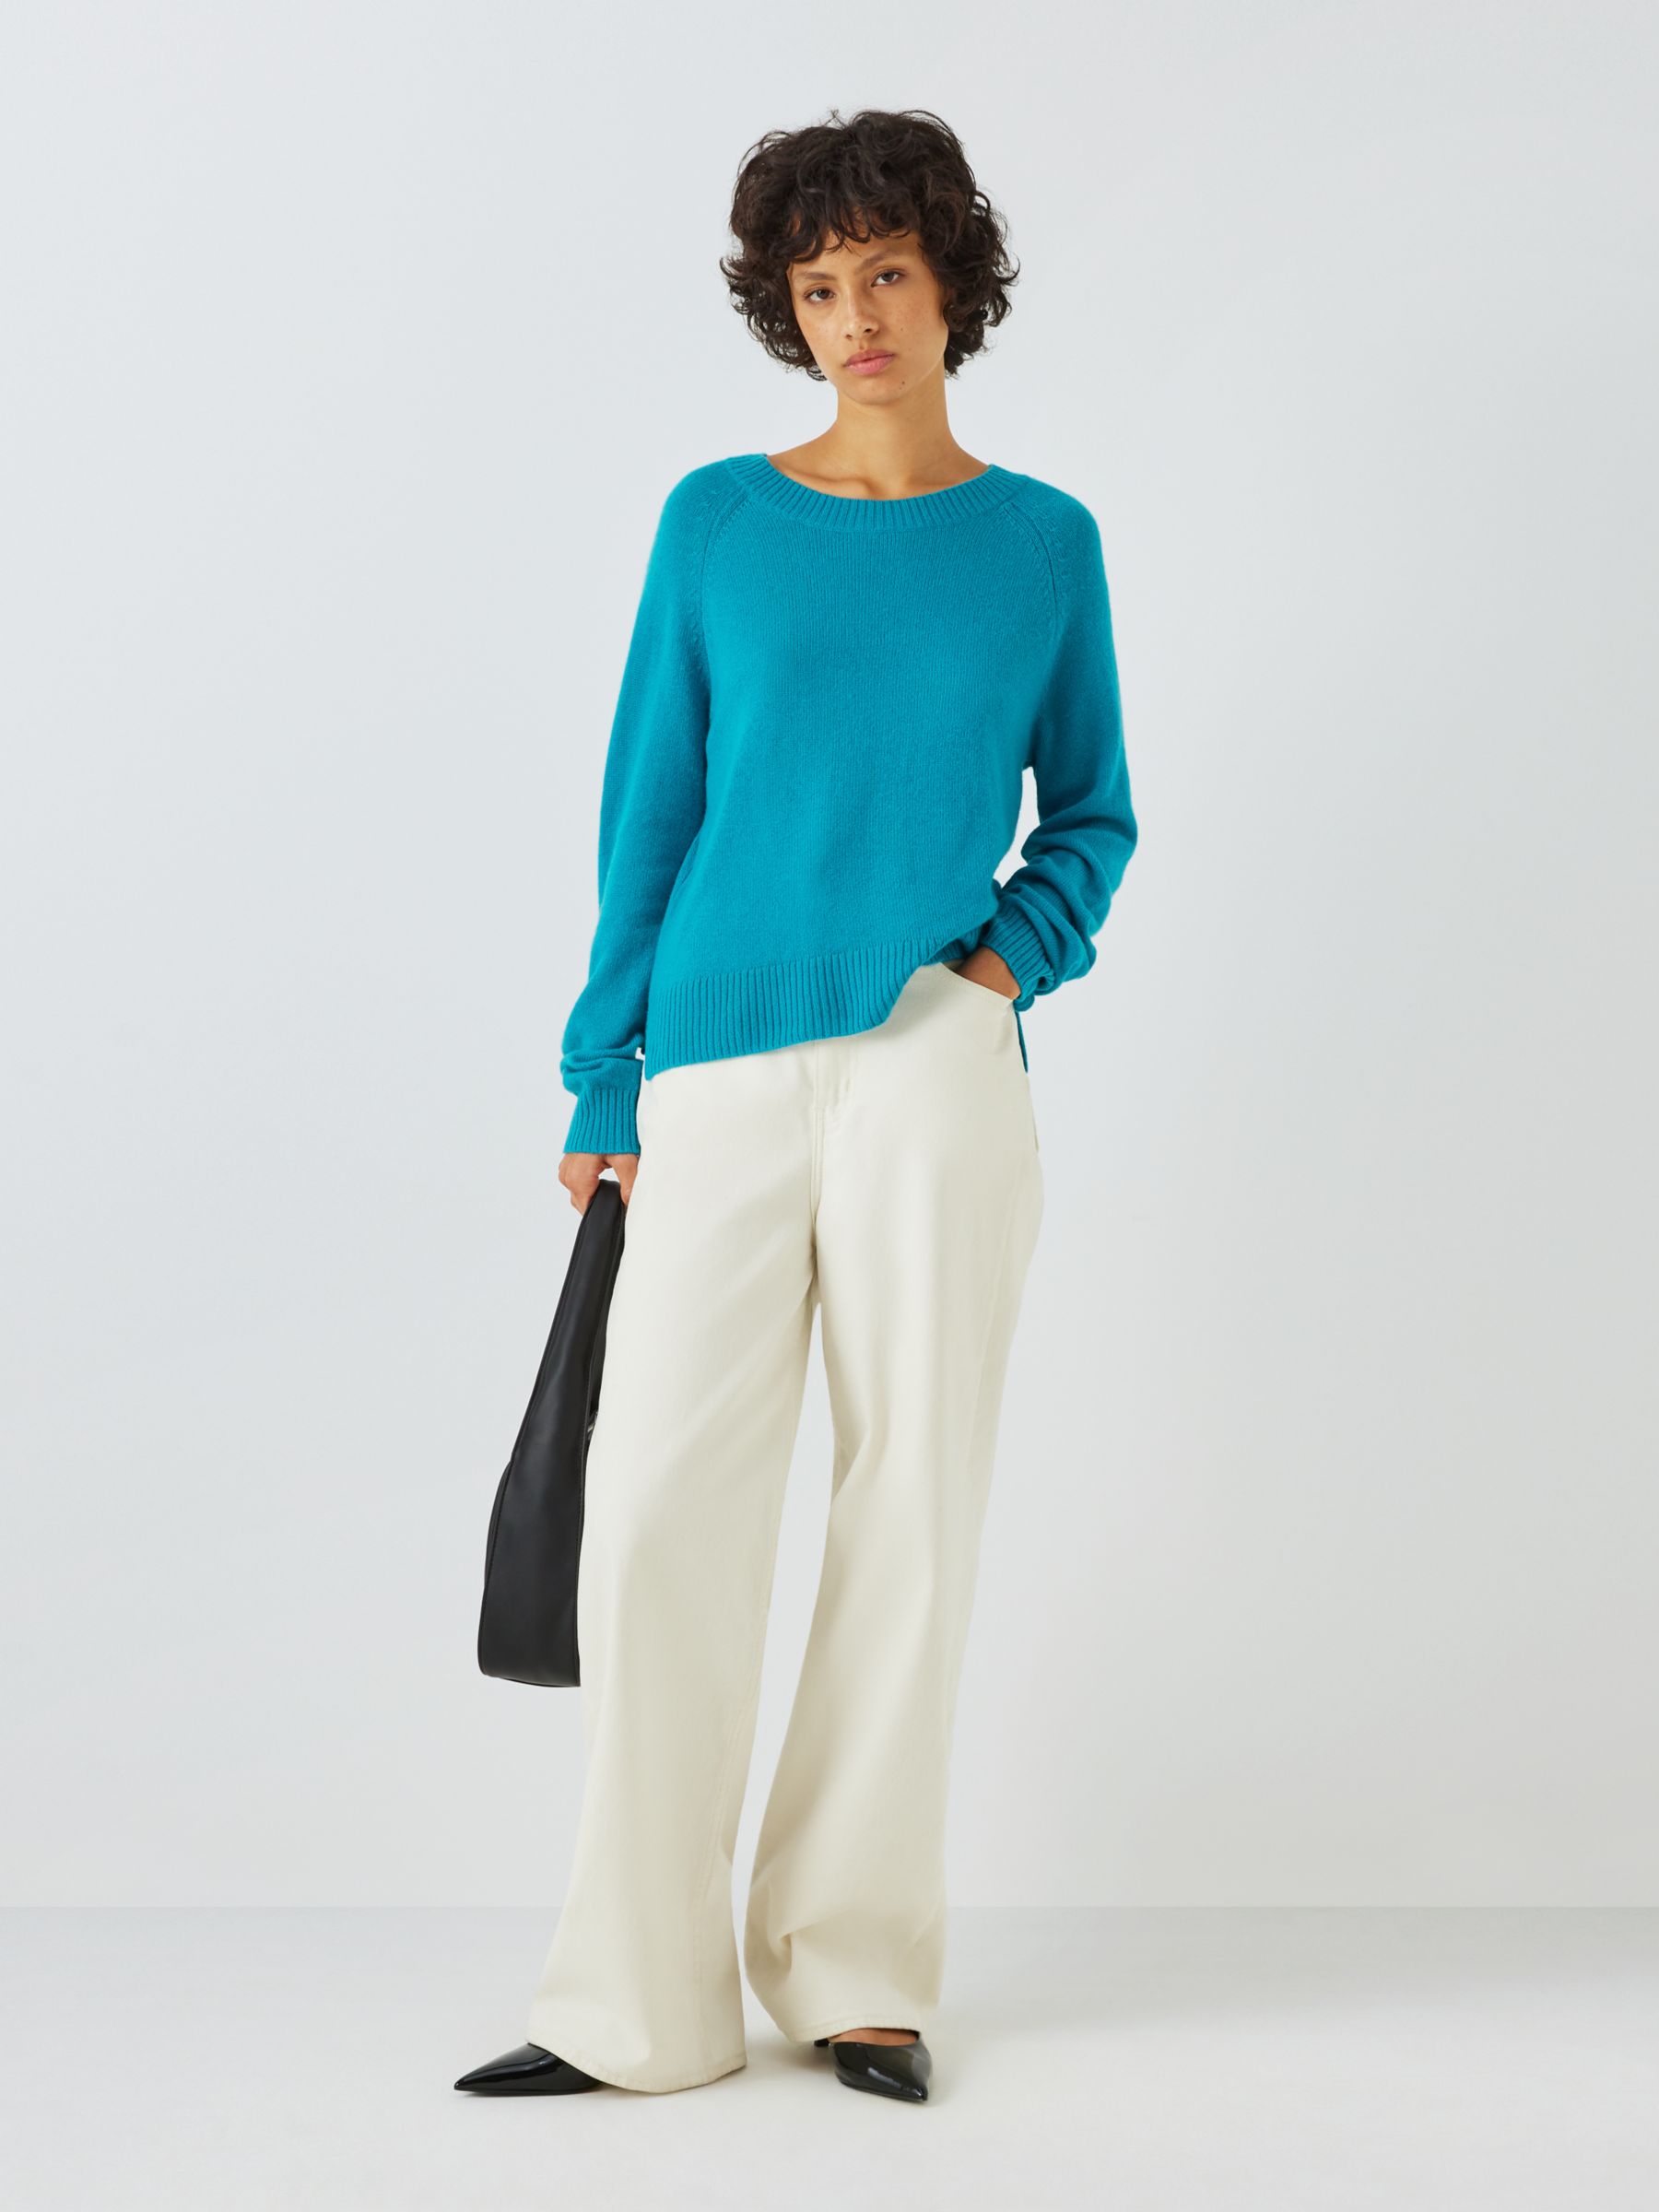 Weekend MaxMara Scatola Relaxed Cashmere Jumper, Turquoise, M